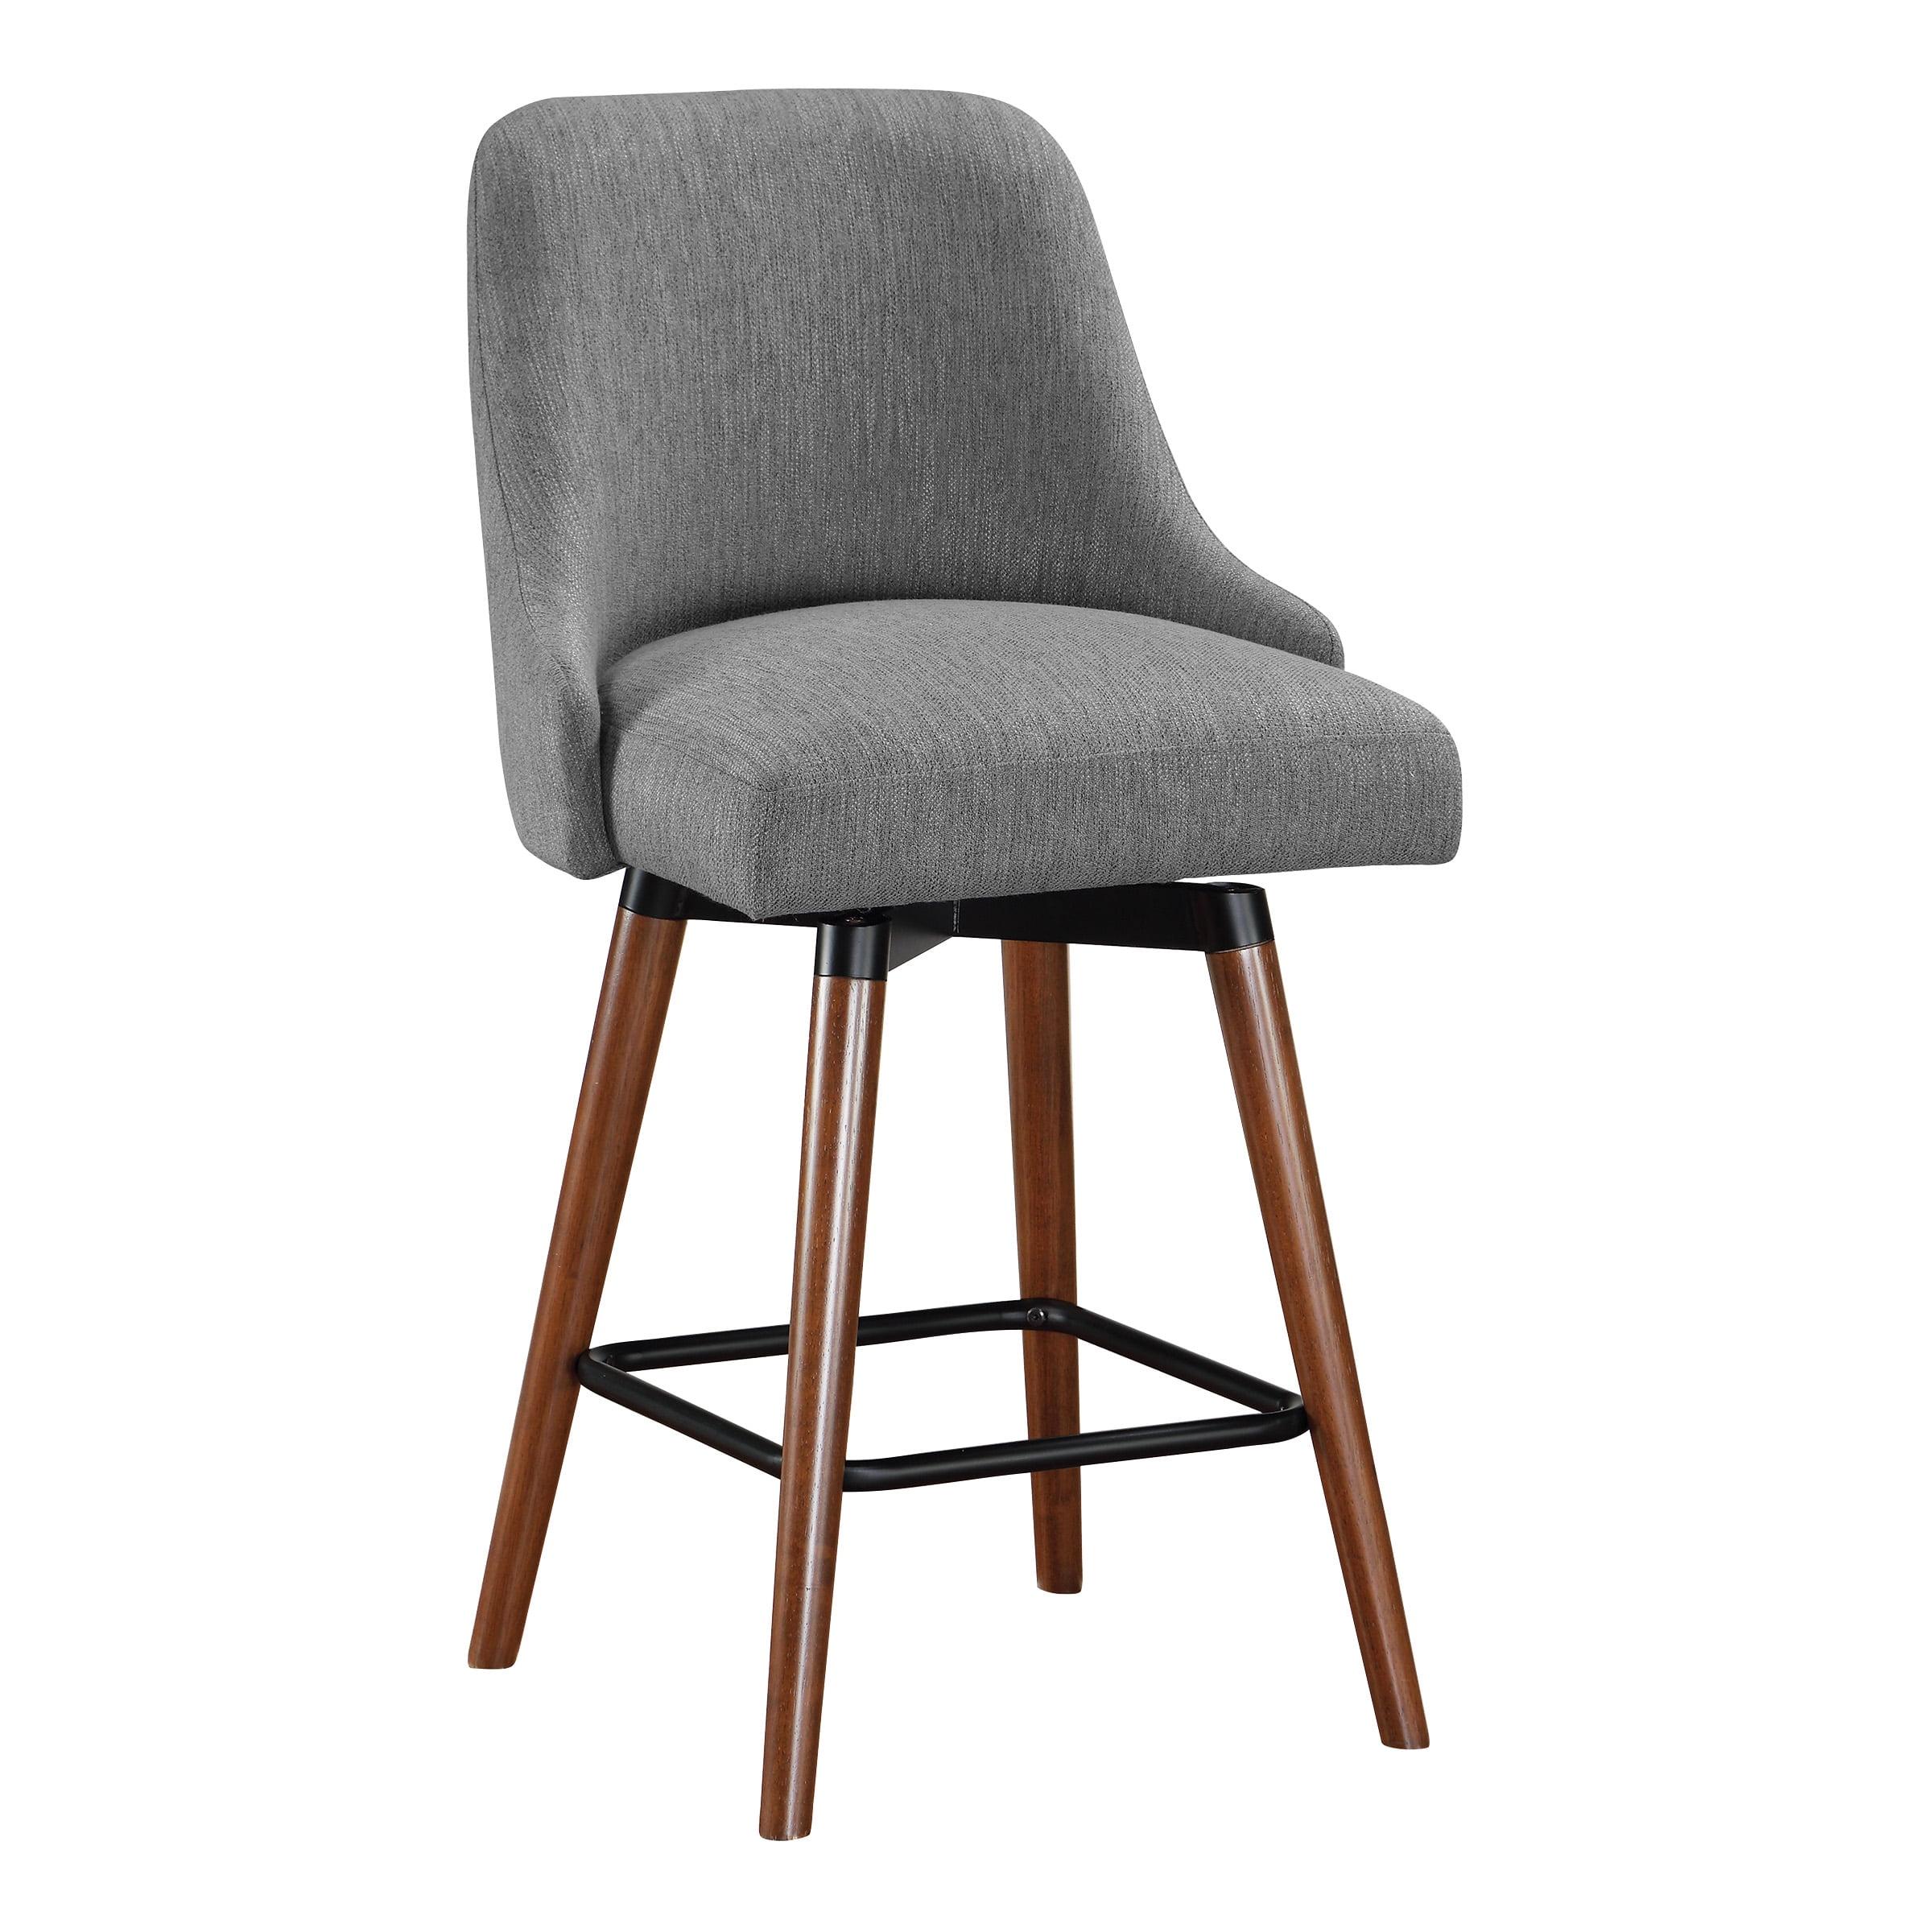 Mid-Century Charcoal Fabric Swivel Counter Stool with Espresso Wood Frame